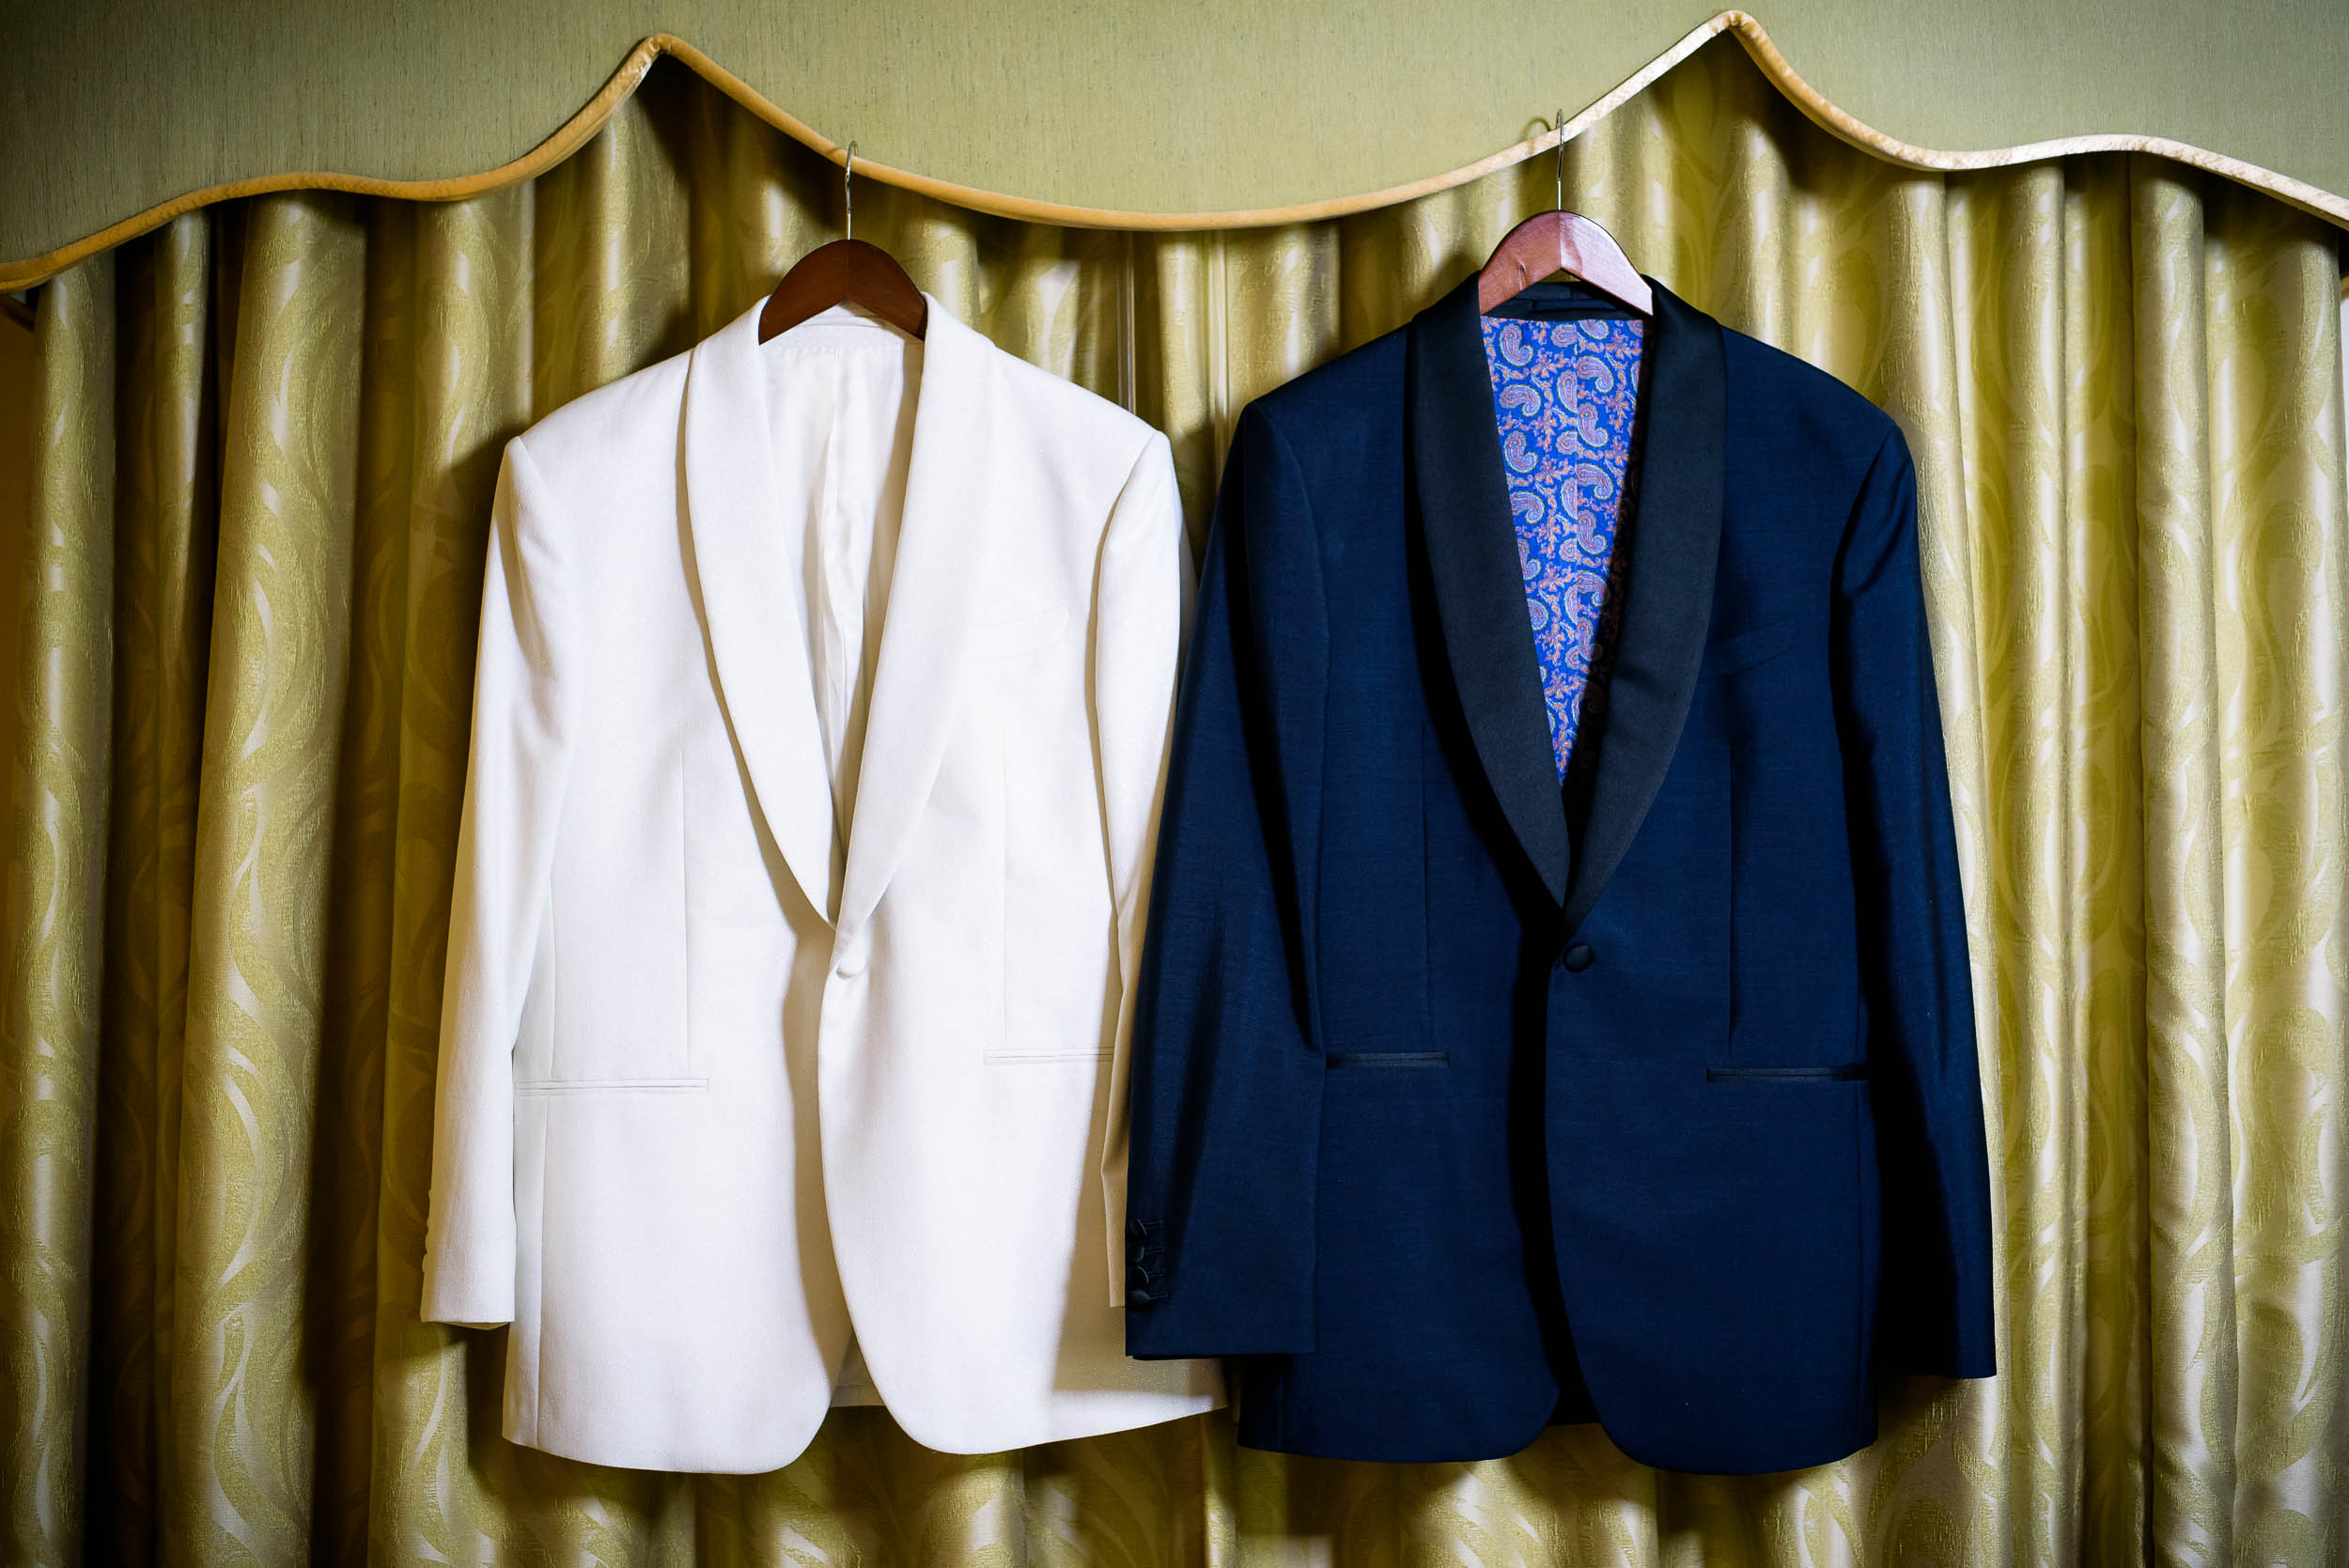 Grooms' suits for luxurious fall wedding at the Chicago Symphony Center captured by J. Brown Photography. See more wedding ideas at jbrownphotography.com!